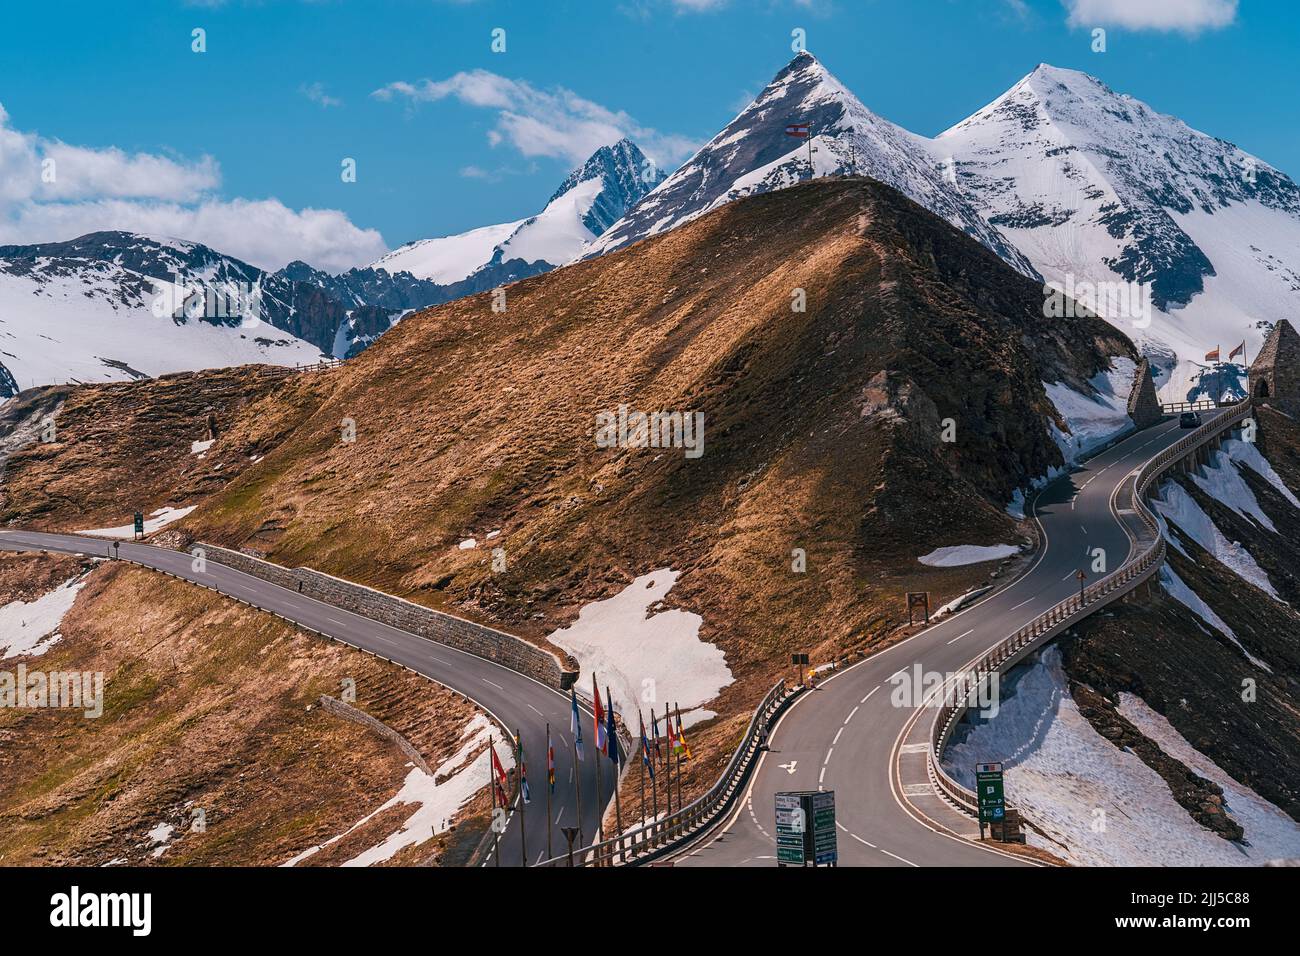 A great view of the snow covered mountains and the famous Grossglockner high alpine road. Stock Photo